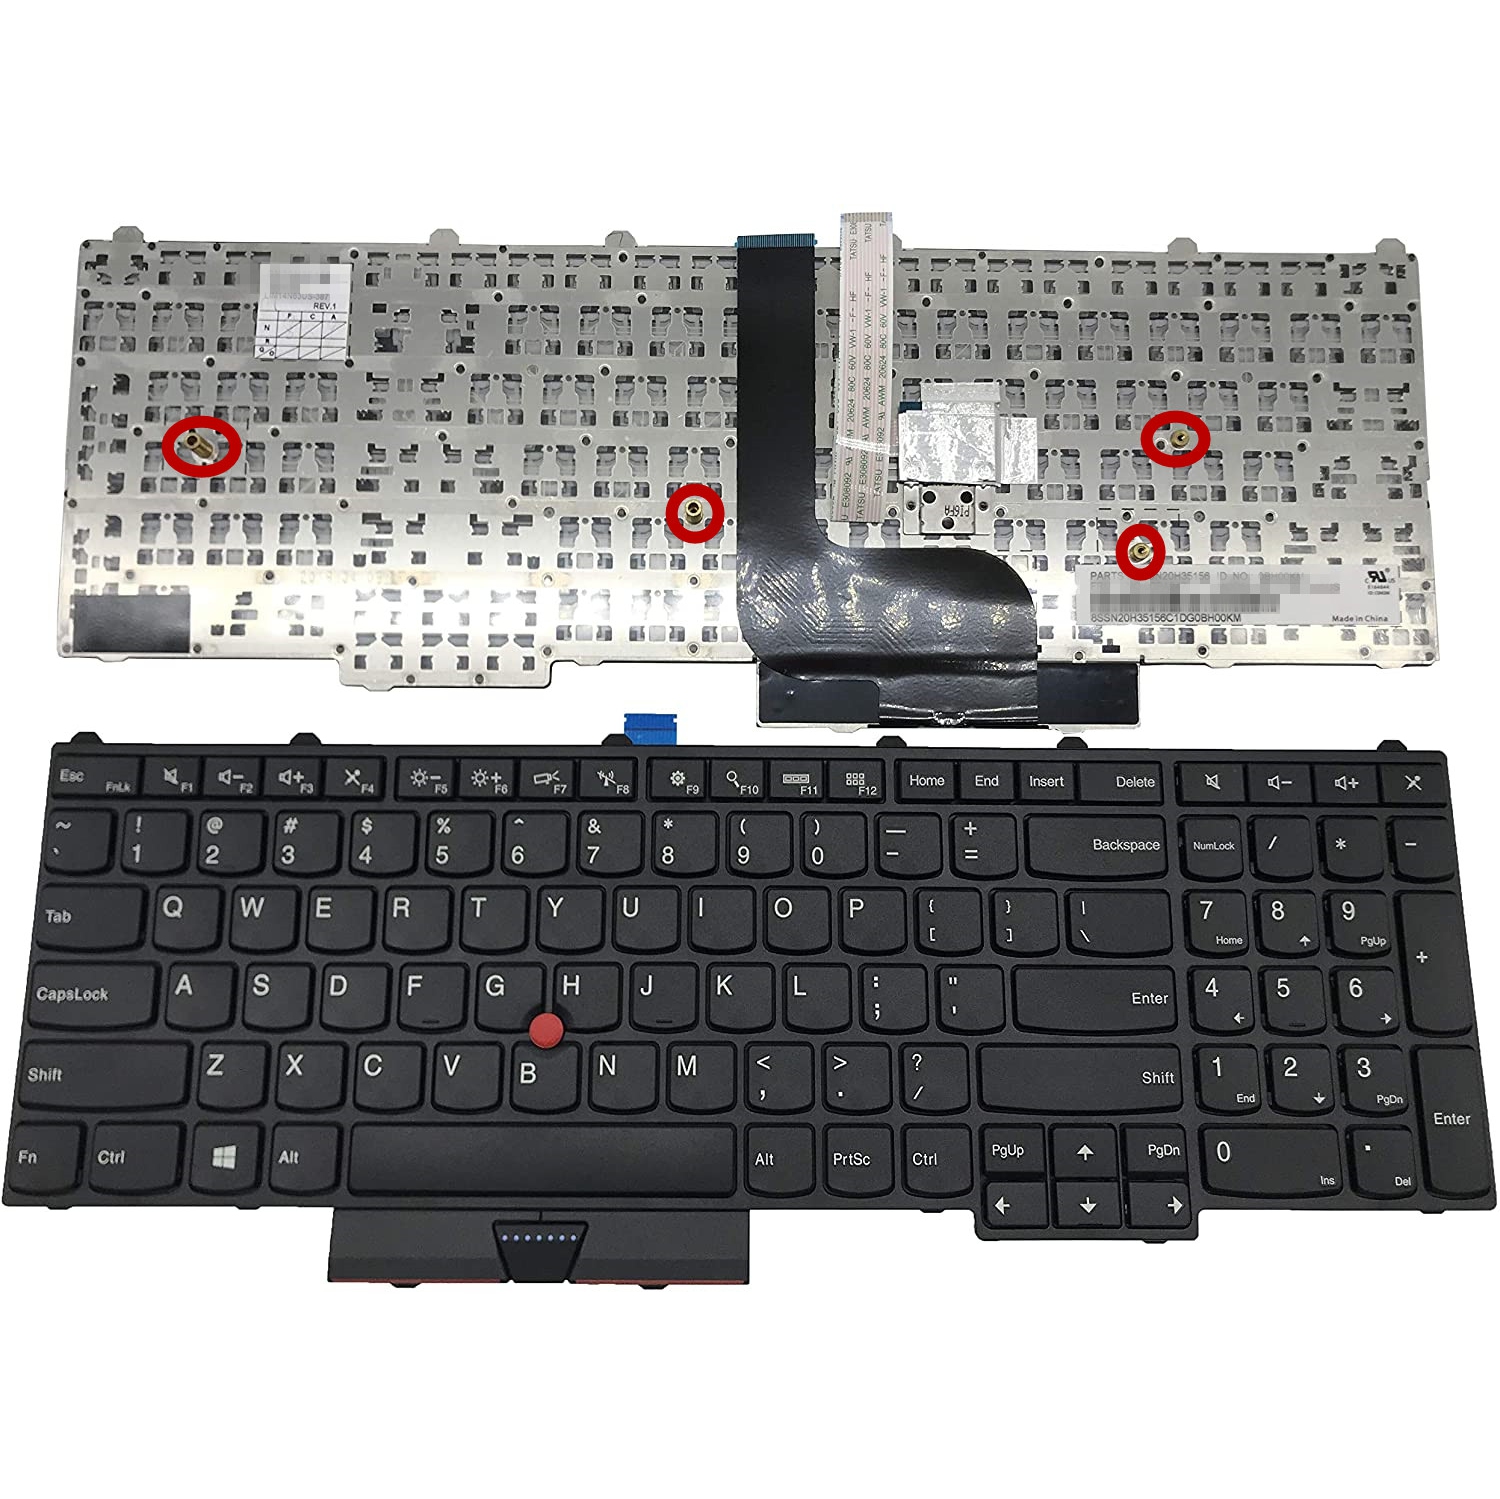 Laptop Replacement US Layout Keyboard for Lenovo ThinkPad P50(20EN/20EQ) P70(20ER/20ES) P51 P71 Without Backlit P/N: 00PA288 SN20K85114 00PA247 0BH00HH SN20H35156 00PA329 00PA247 (NOT for P50S P51S)